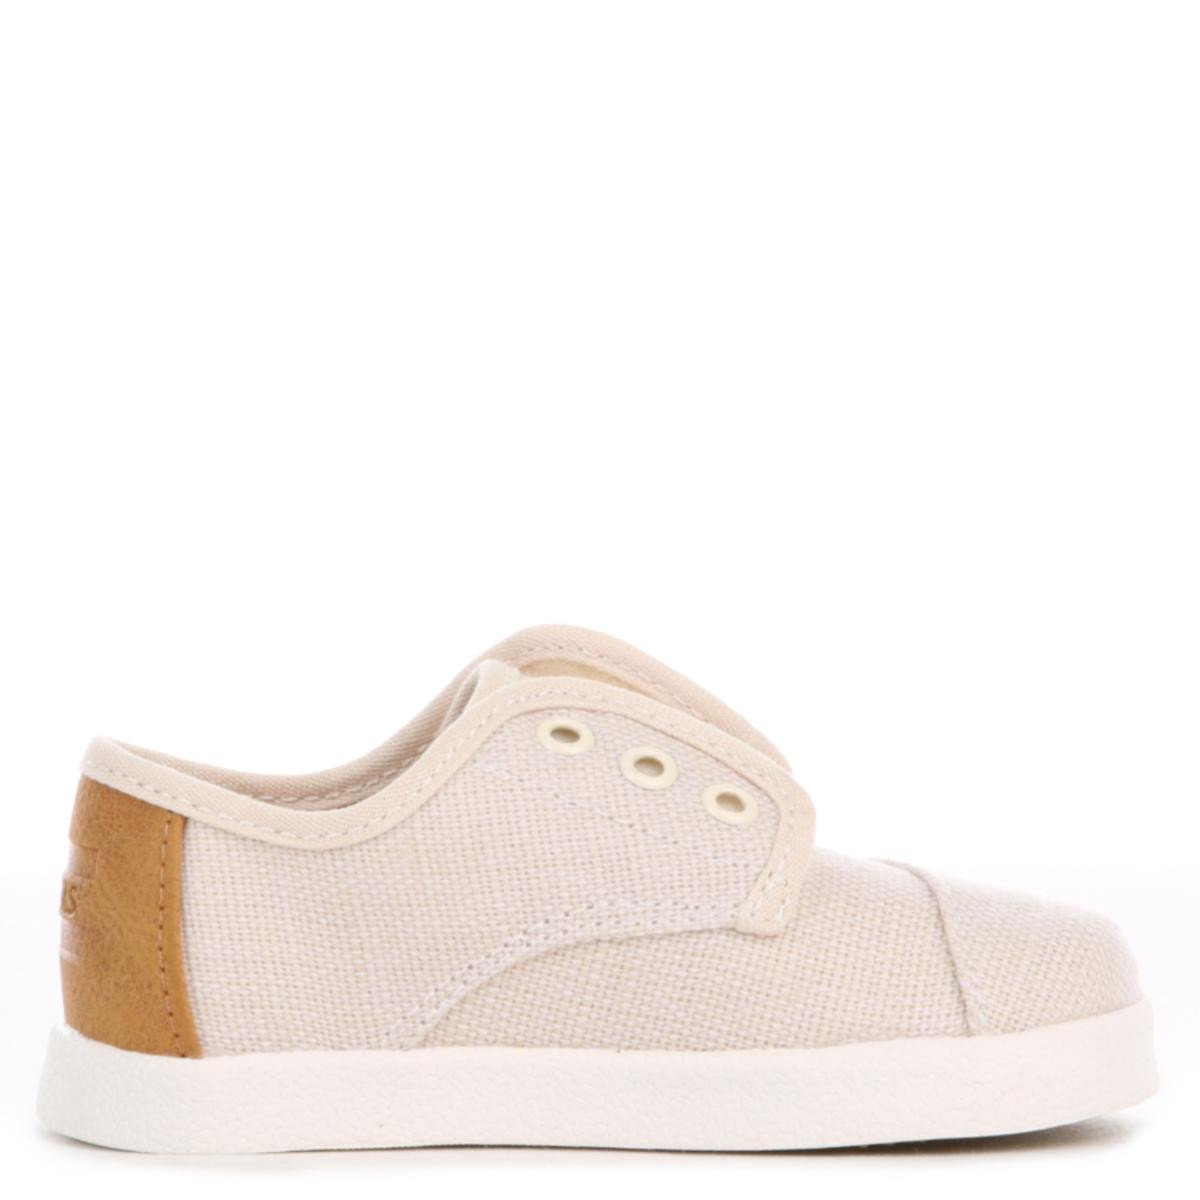 Toms for Toddlers: Natural Burlap Paseo Sneaker